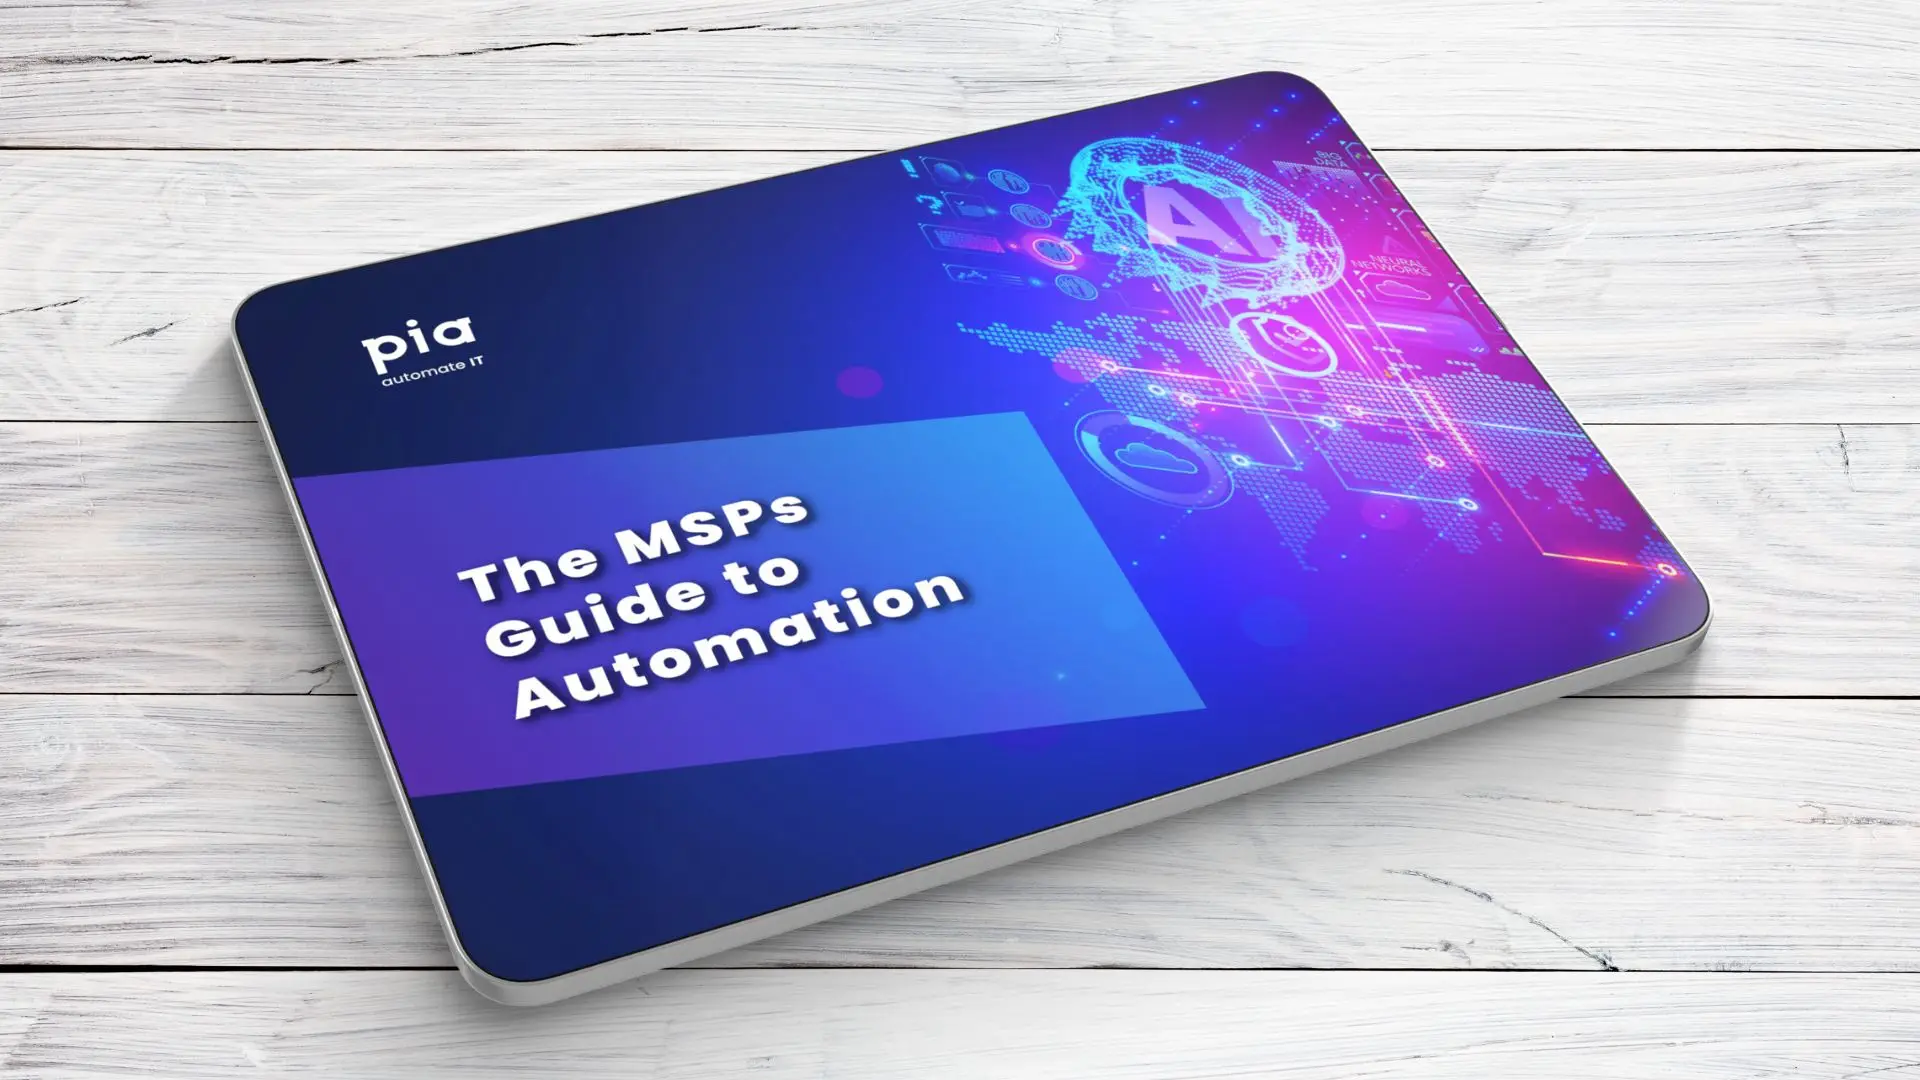 The MSPs Guide to Automation